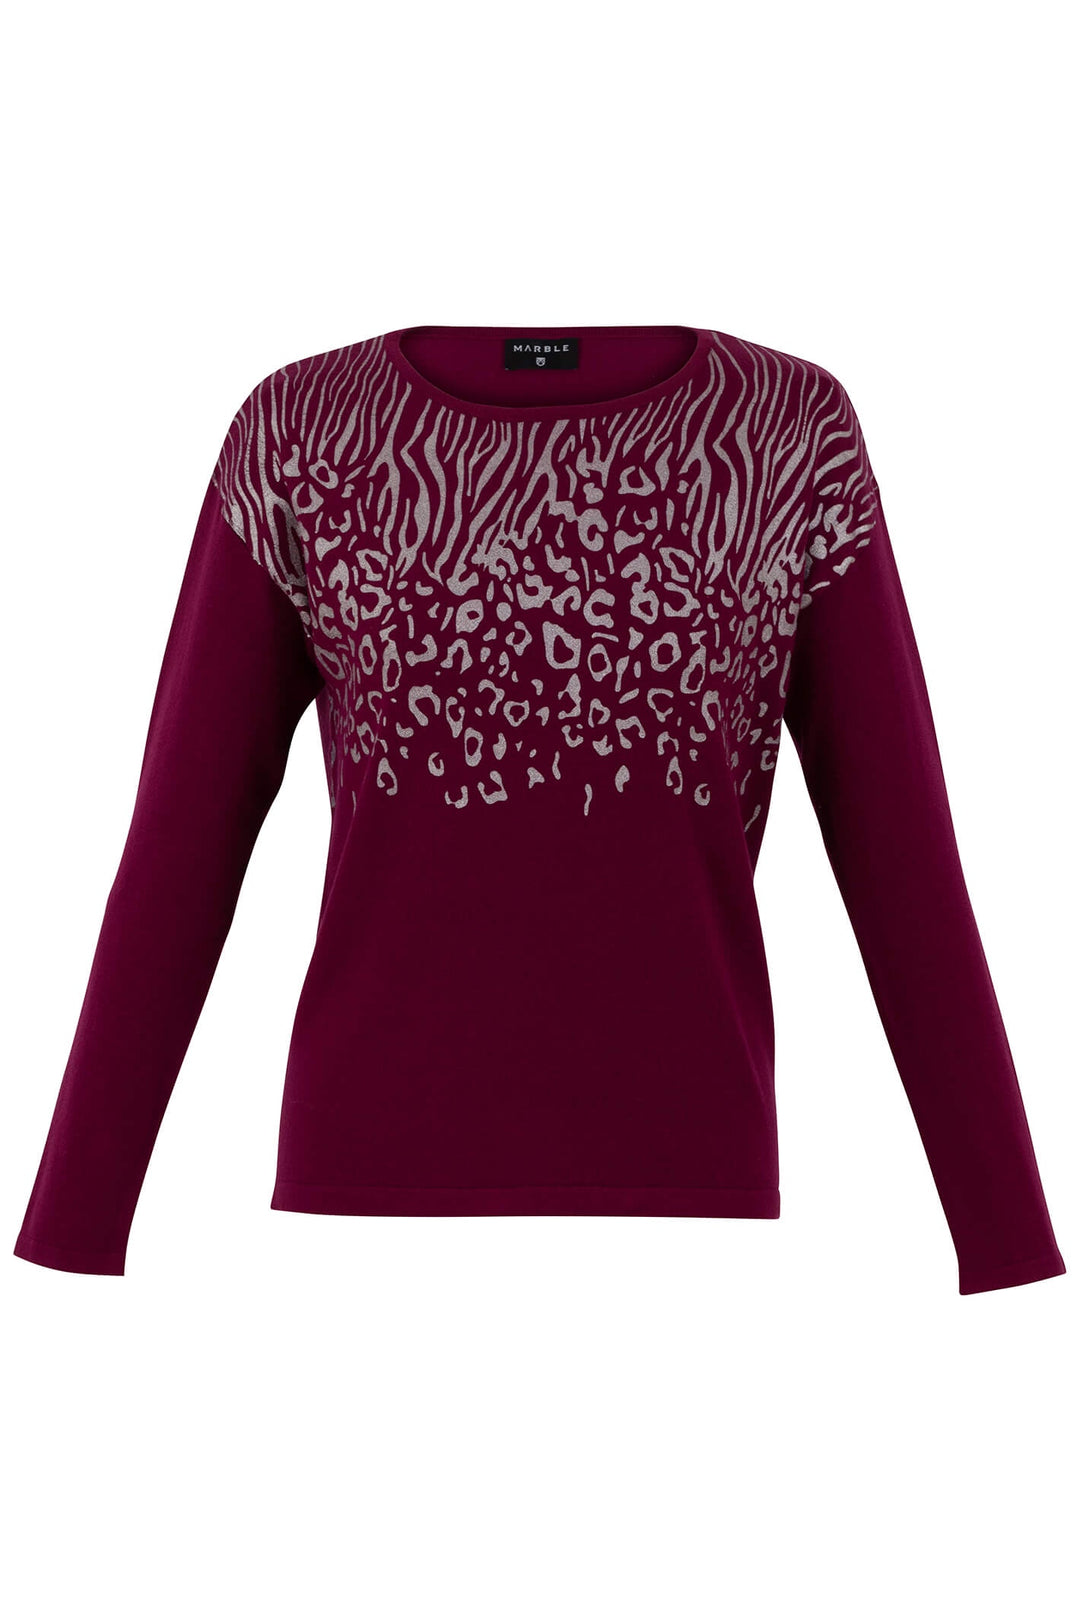 Marble 7117 205 Berry Red Animal Print Jumper - Dotique